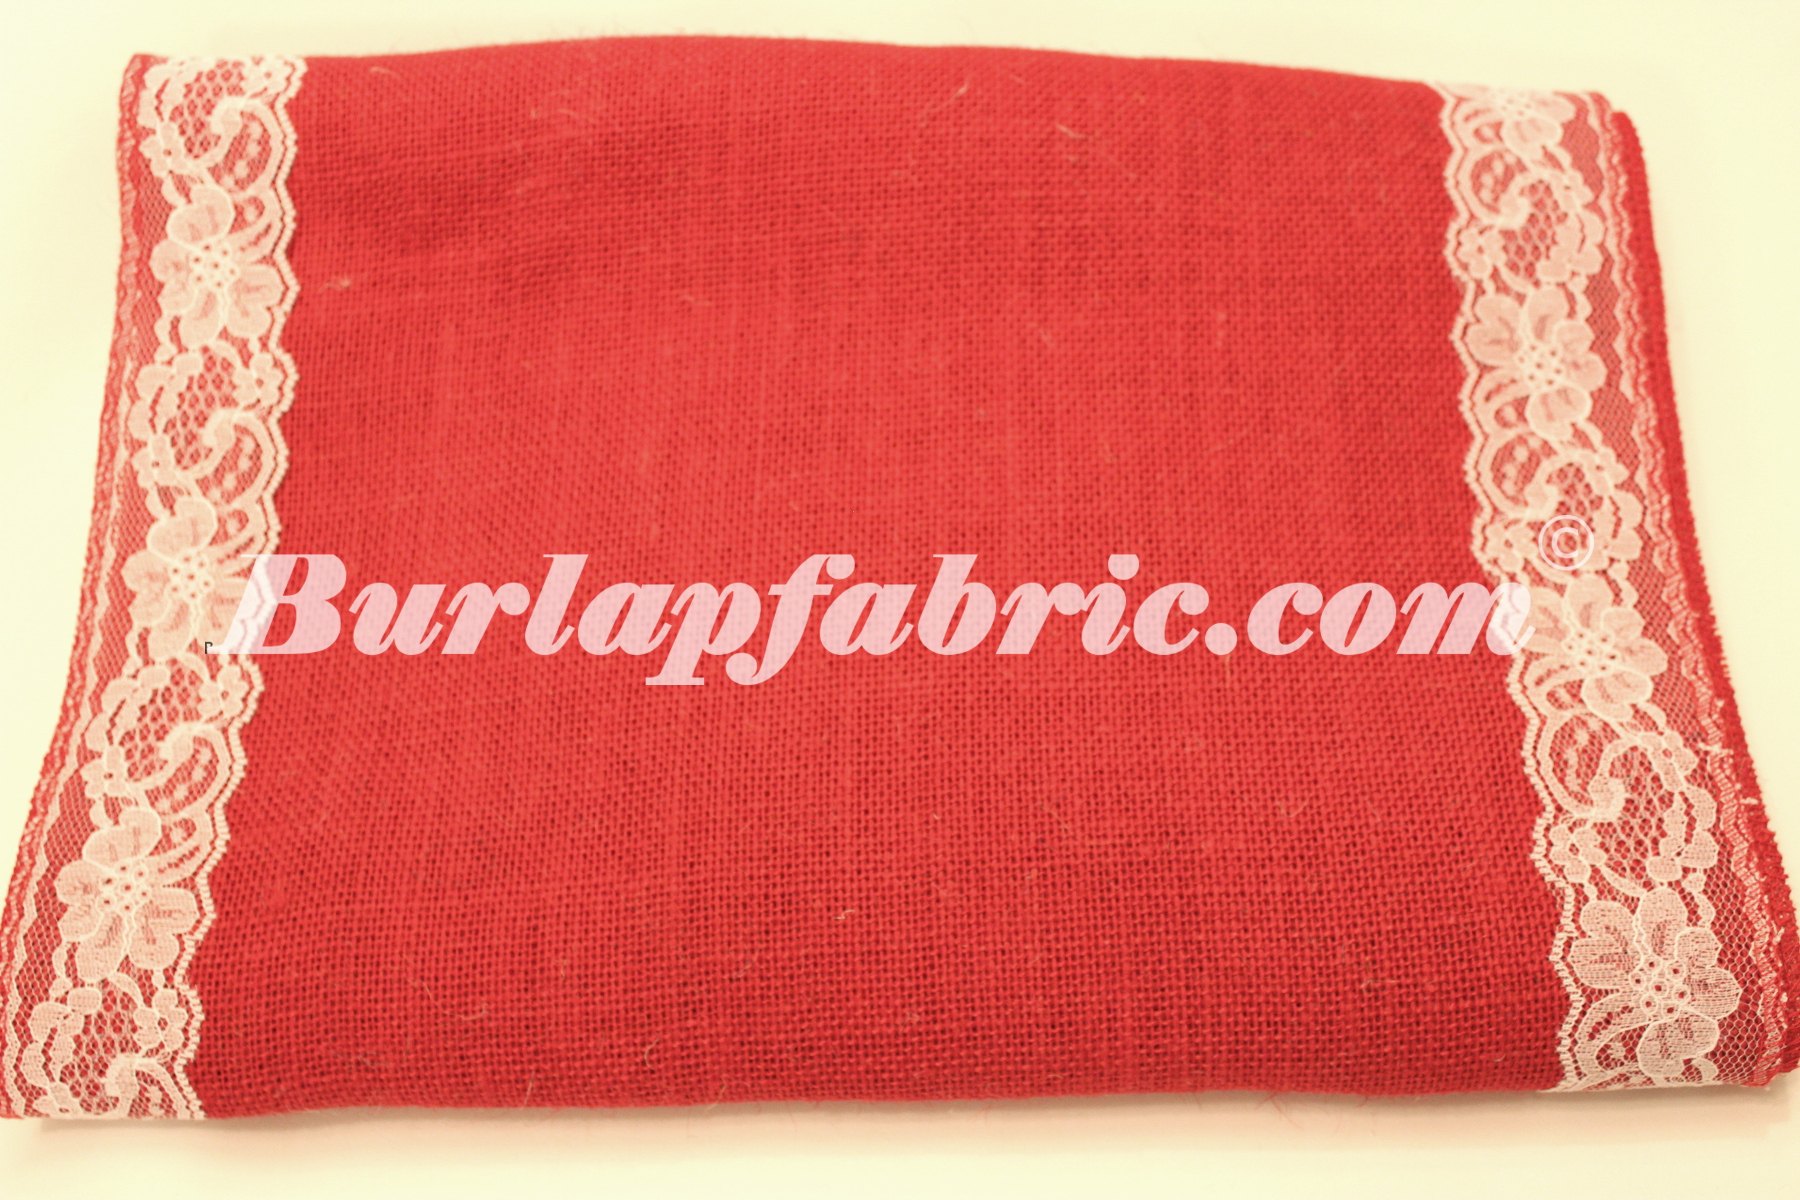 14" Red Burlap Runner with 2" White Lace Borders